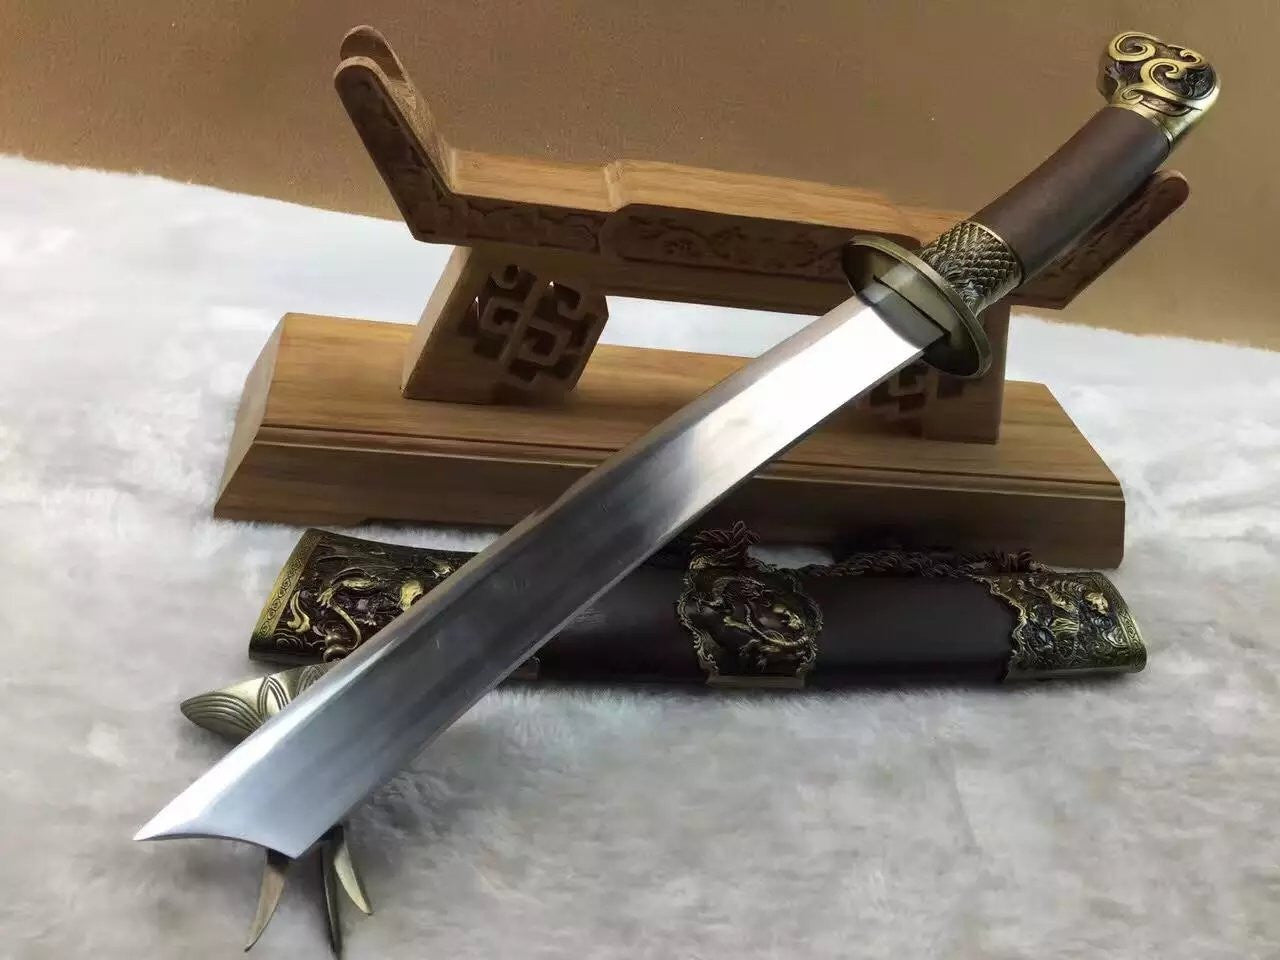 Dagger sword,High manganese steel,Rosewood scabbard,Alloy fitting,Length 20 inch - Chinese sword shop